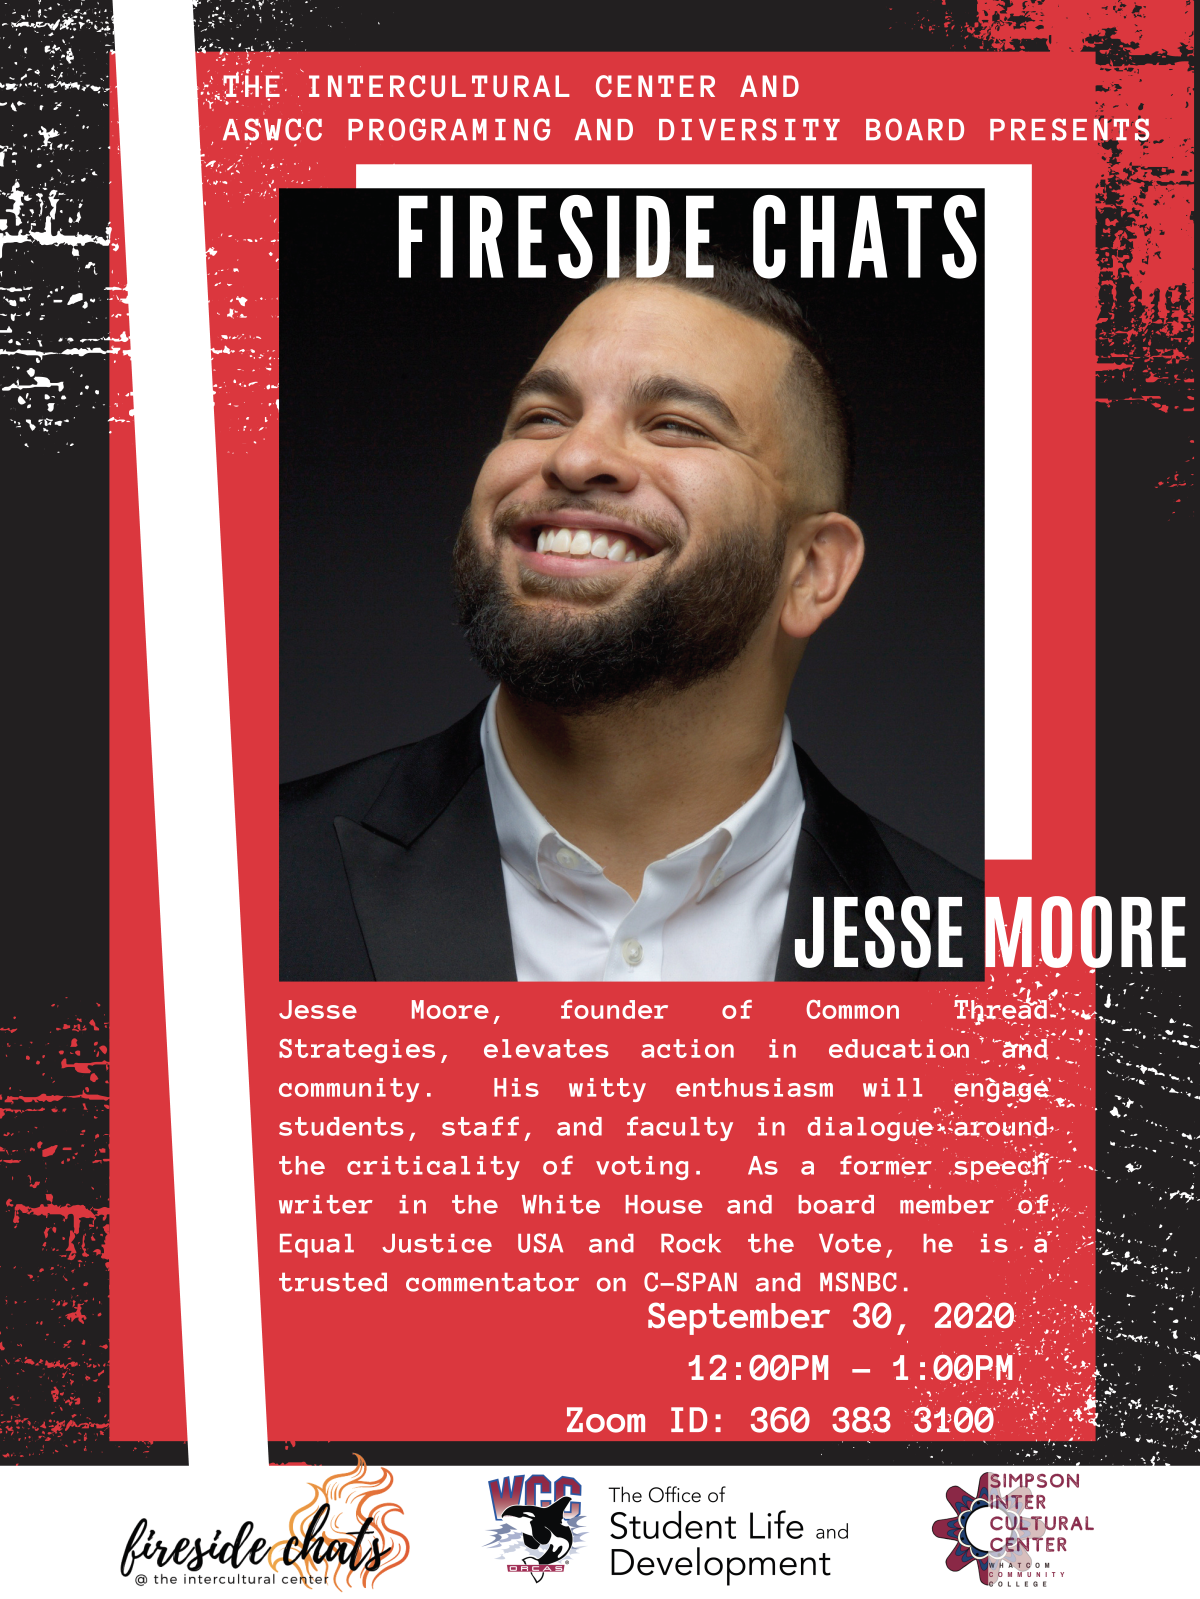 Intercultural Center and ASWCC Programming and Diversity Board presents Jesse Moore, founder of Common  Thread Strategies.  Jesse elevates action in education and community.  His witty enthusiasm will engage students,  staff, and faculty in dialogue around the criticality of voting.  As a former speech writer in the White House and  board member of Equal Justice USA and Rock the Vote, he is a trusted commentator on C-SPAN and MSNBC. September 30 at 12:00pm zoom 3603833100